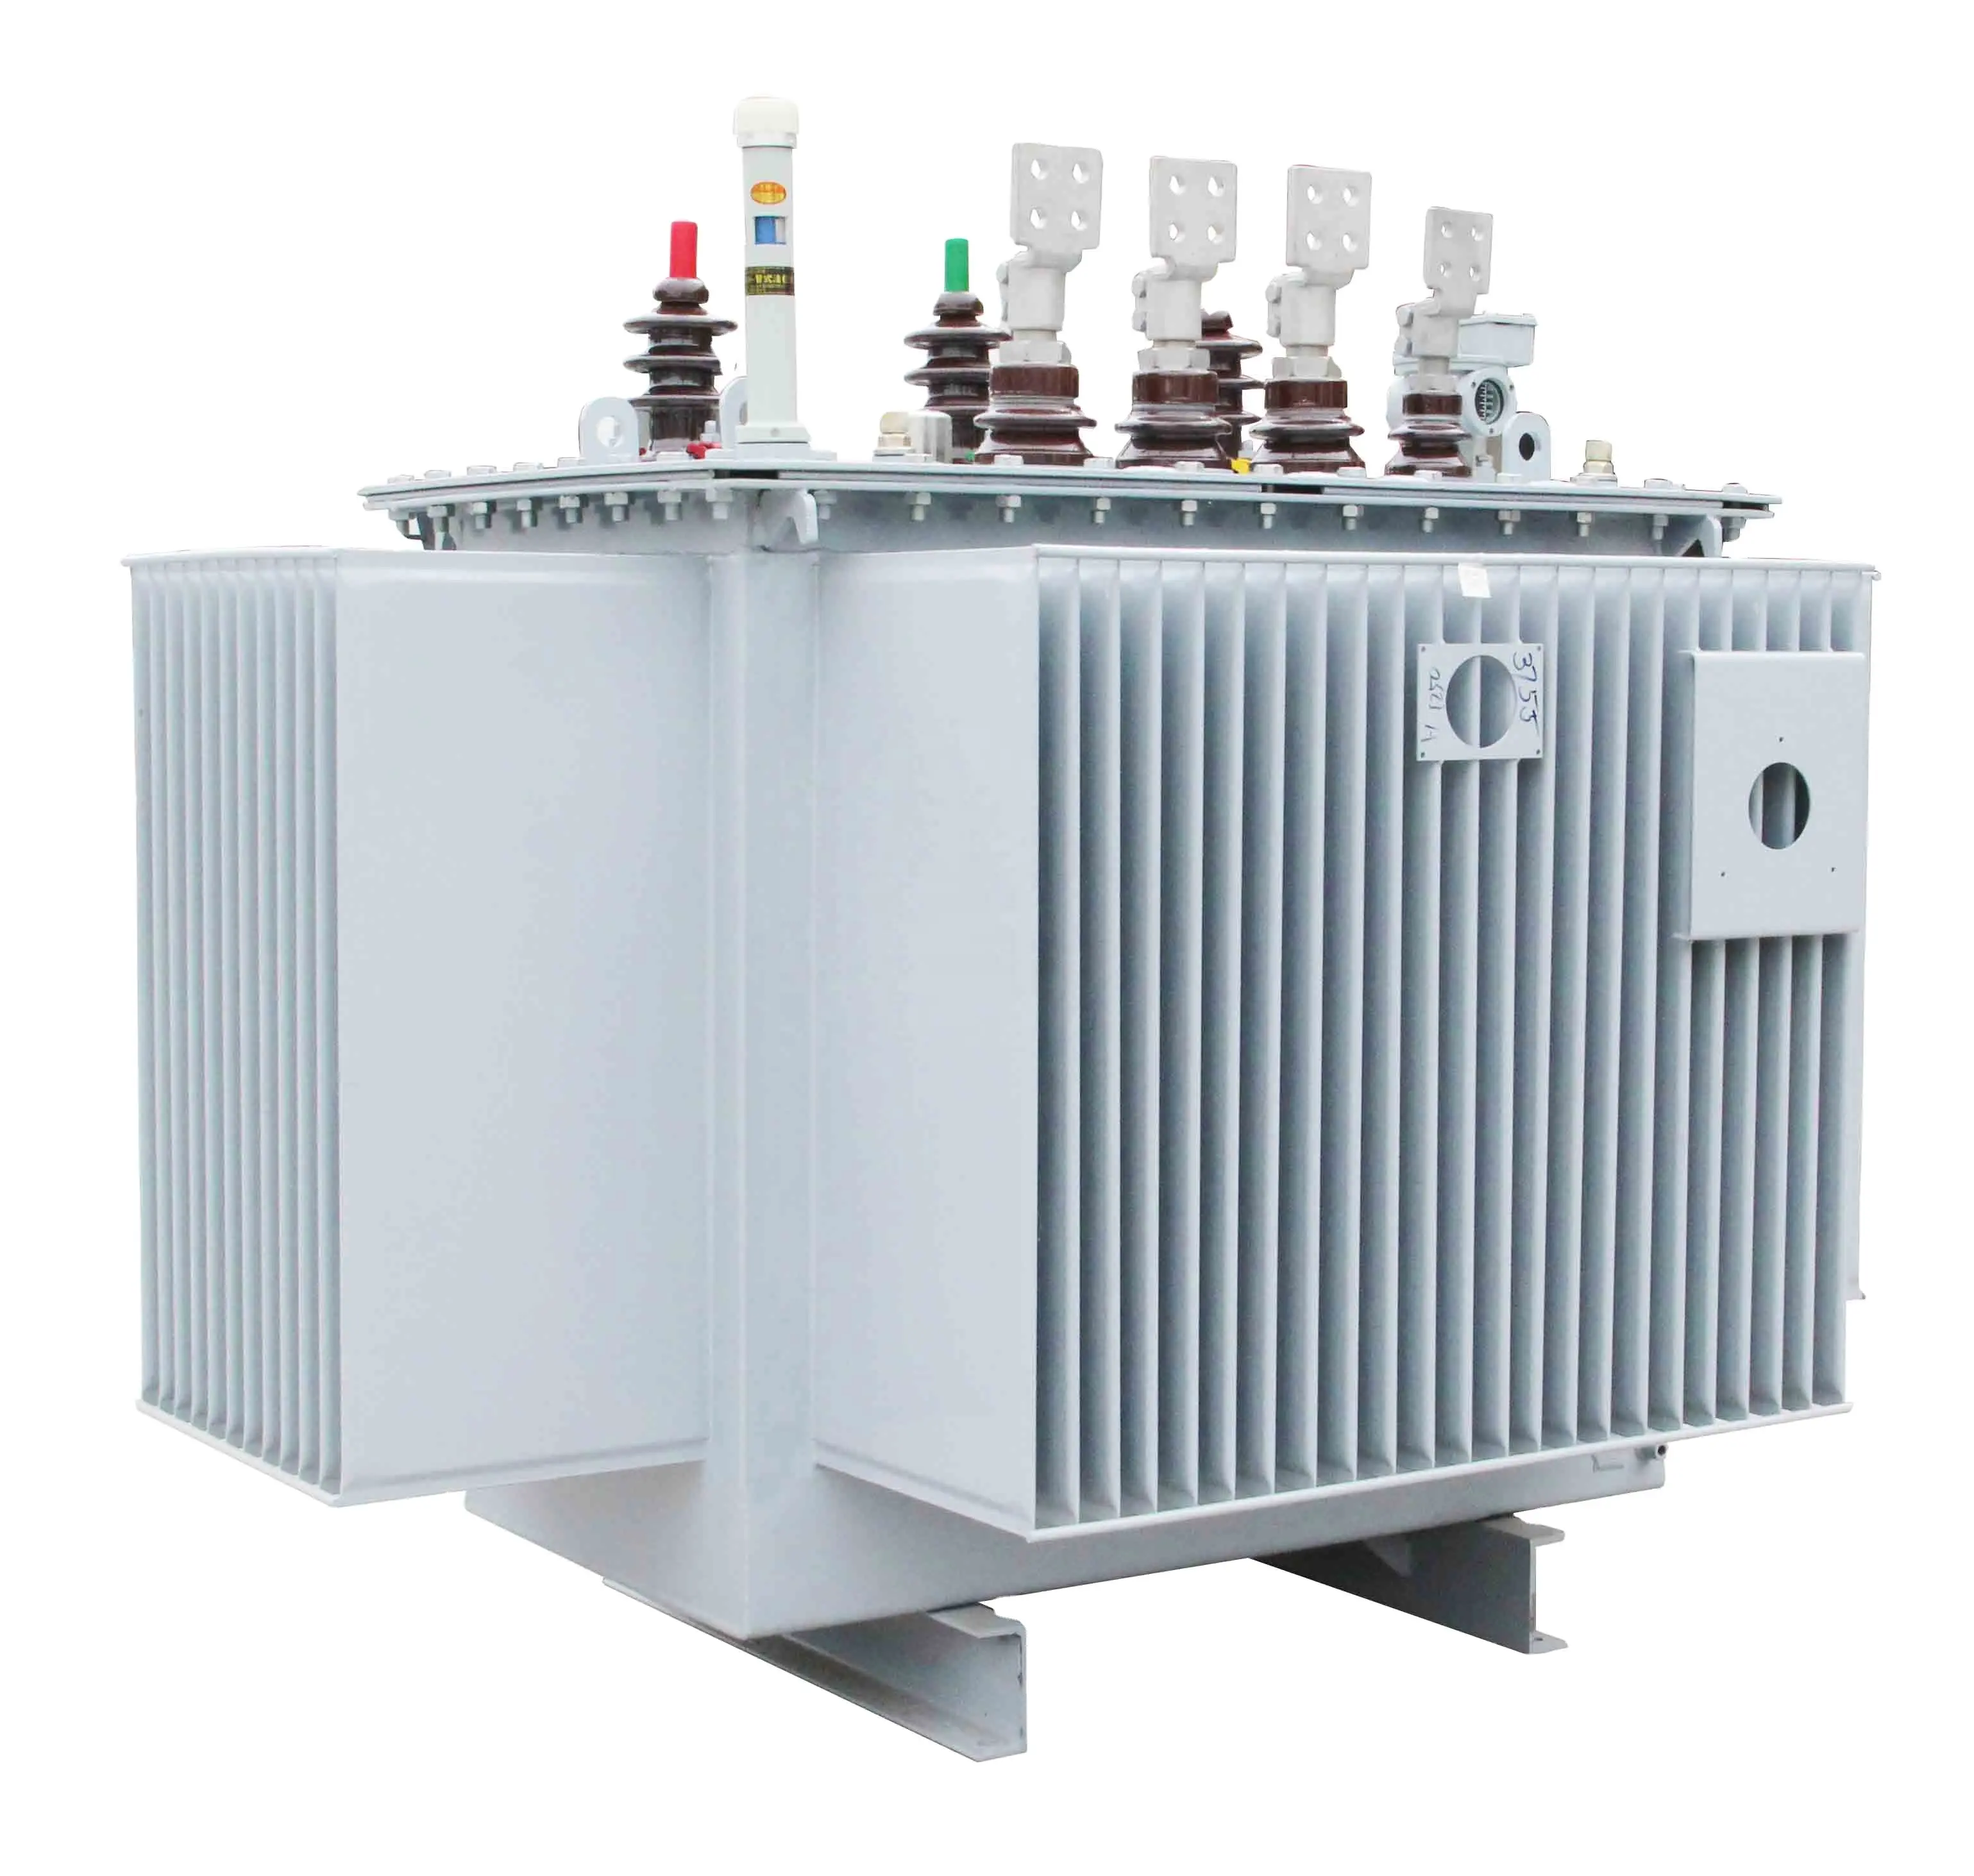 Oil-immersed transformers have the characteristics of good heat dissipation  low loss  large capacity  and low price.